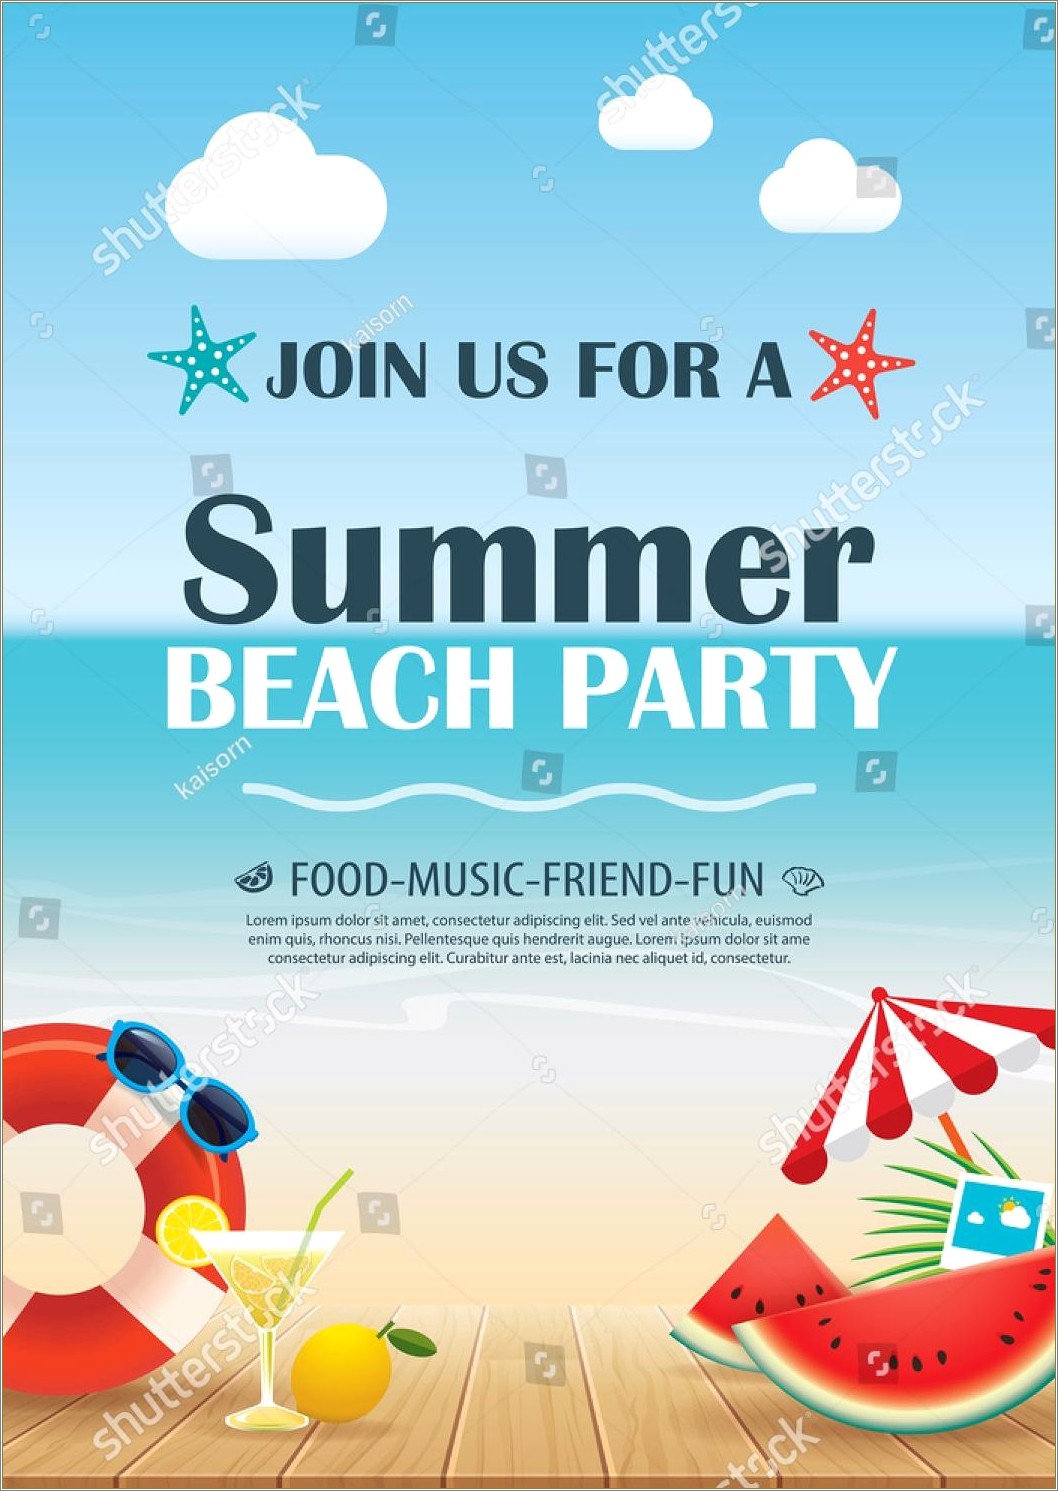 Beach Party Flyer Template Microsoft Word Free